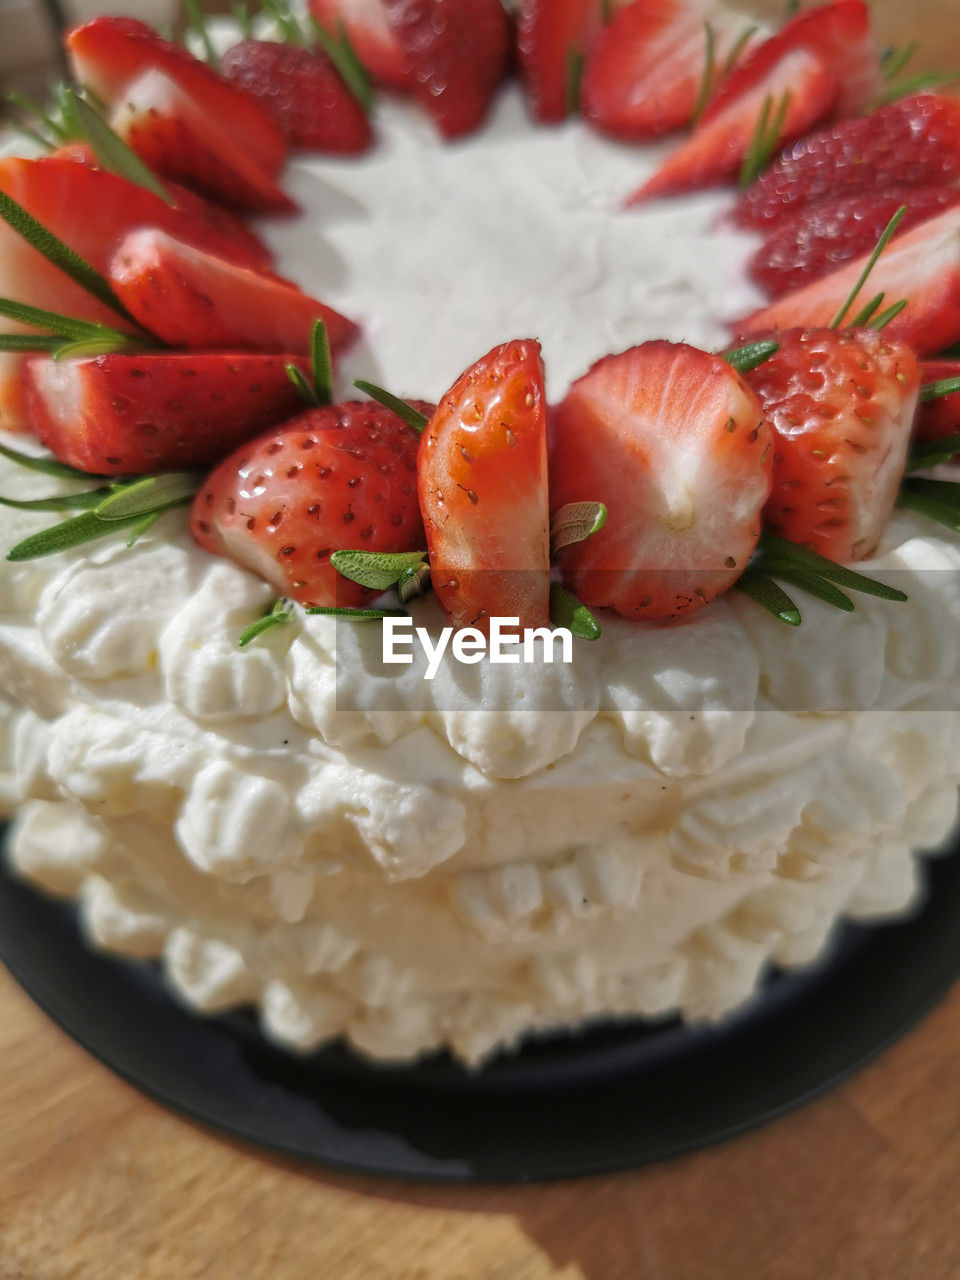 food, food and drink, birthday cake, fruit, healthy eating, strawberry, freshness, dessert, berry, pavlova, dish, cake, icing, indoors, whipped cream, wellbeing, no people, sweet food, produce, sweet, close-up, strawberry pie, plant, vegetable, cuisine, table, red, dairy, baked, plate